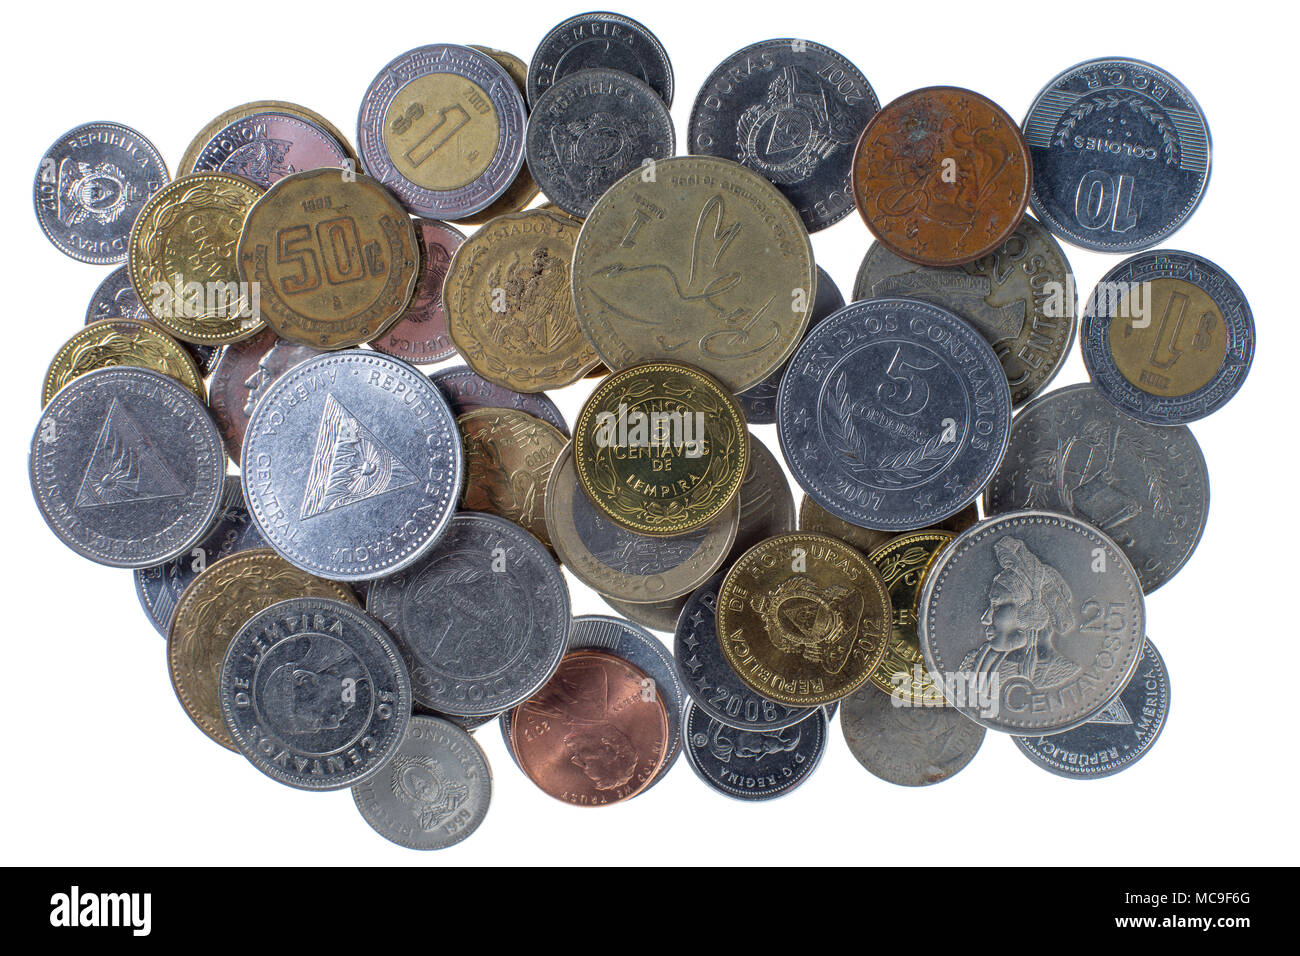 coins from various countries Stock Photo